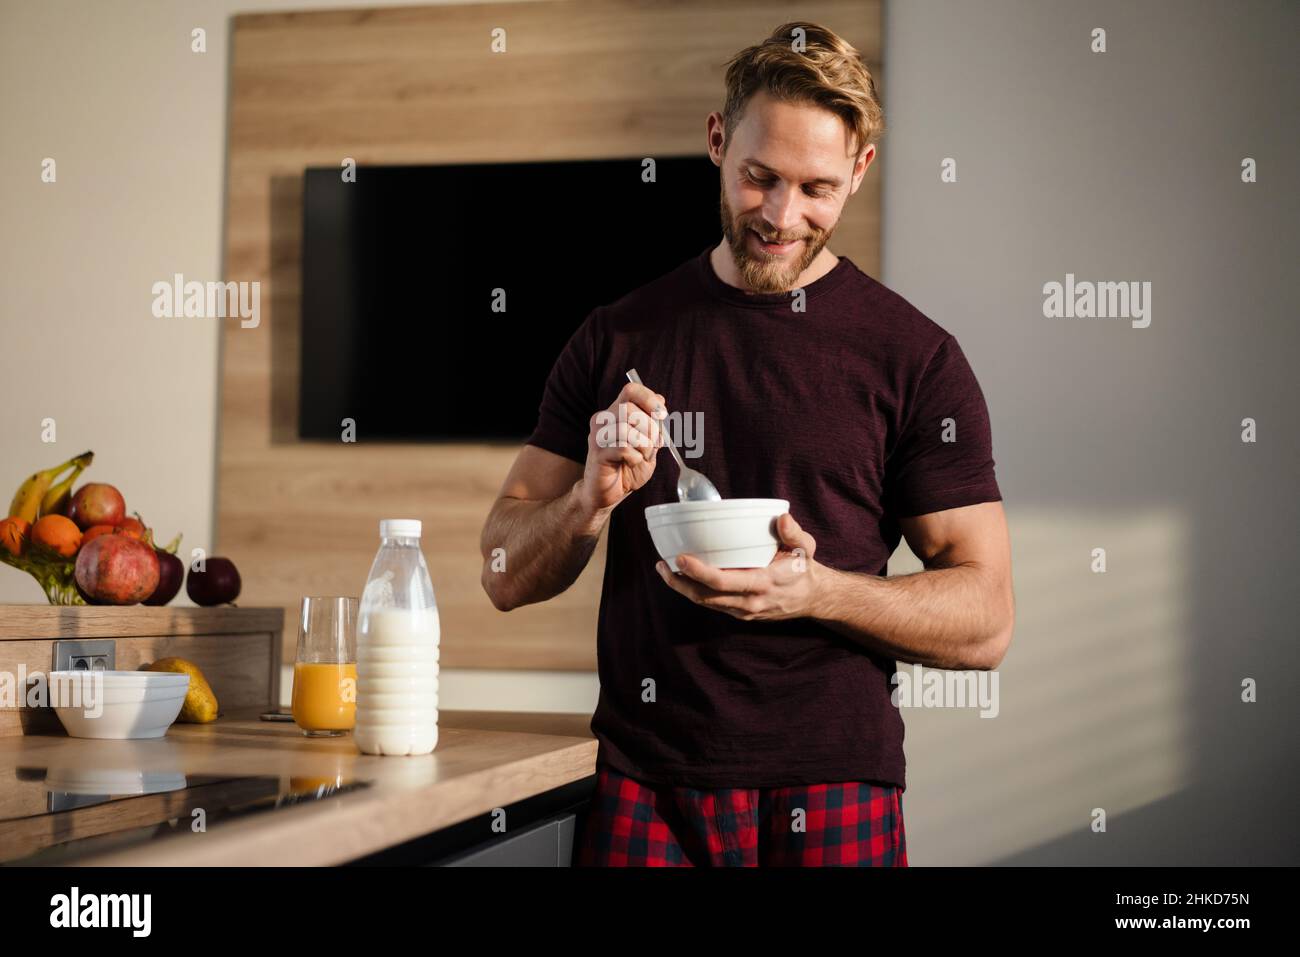 Attractive healthy young man having tasty breakfast while standing in the kitchen, holding bowl Stock Photo